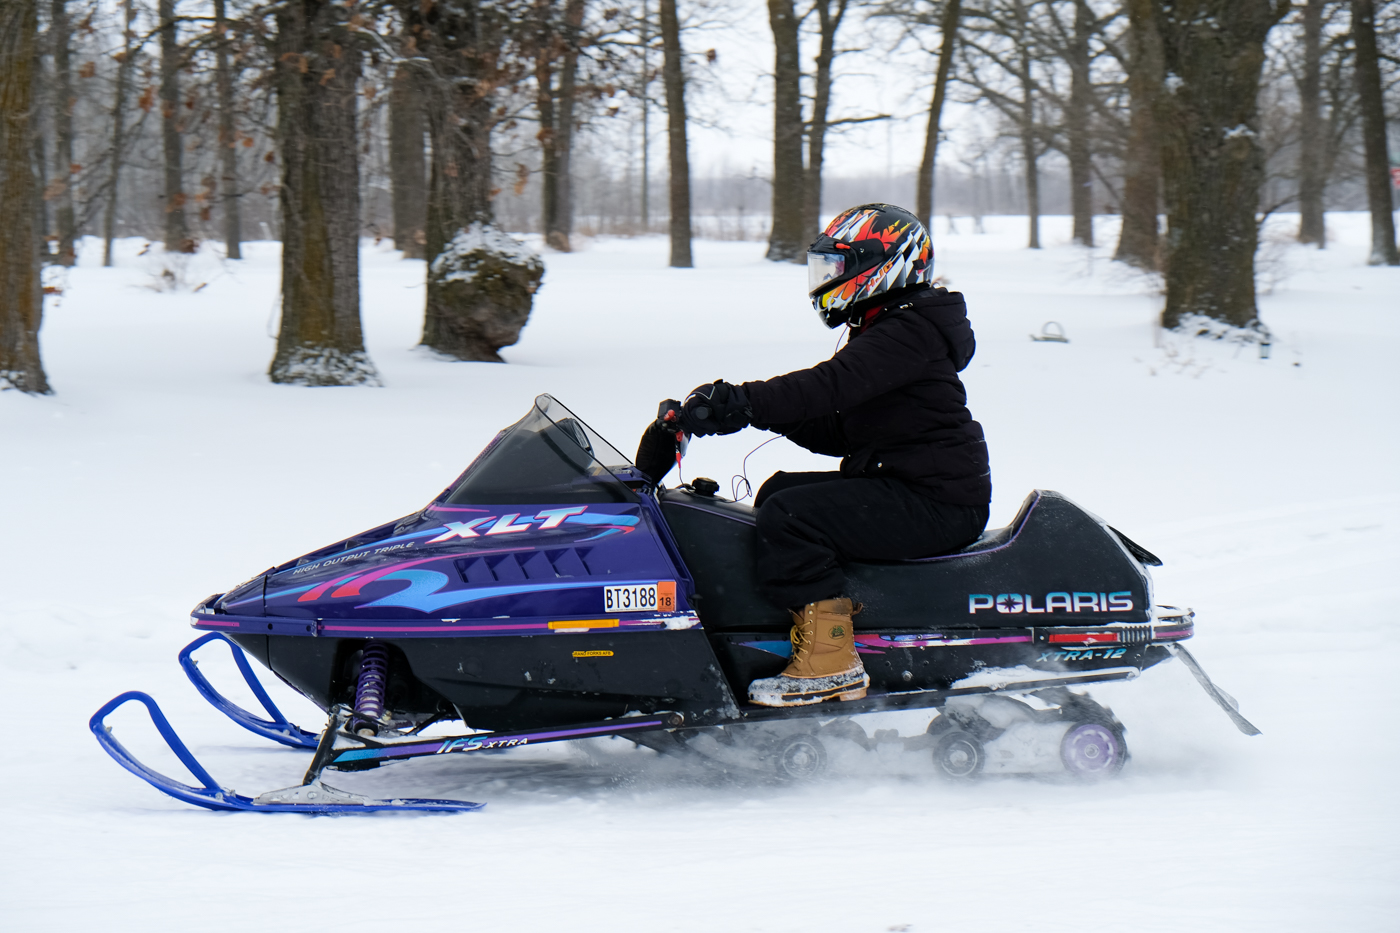 Debora Dahl playing in the snow in the snowmobile